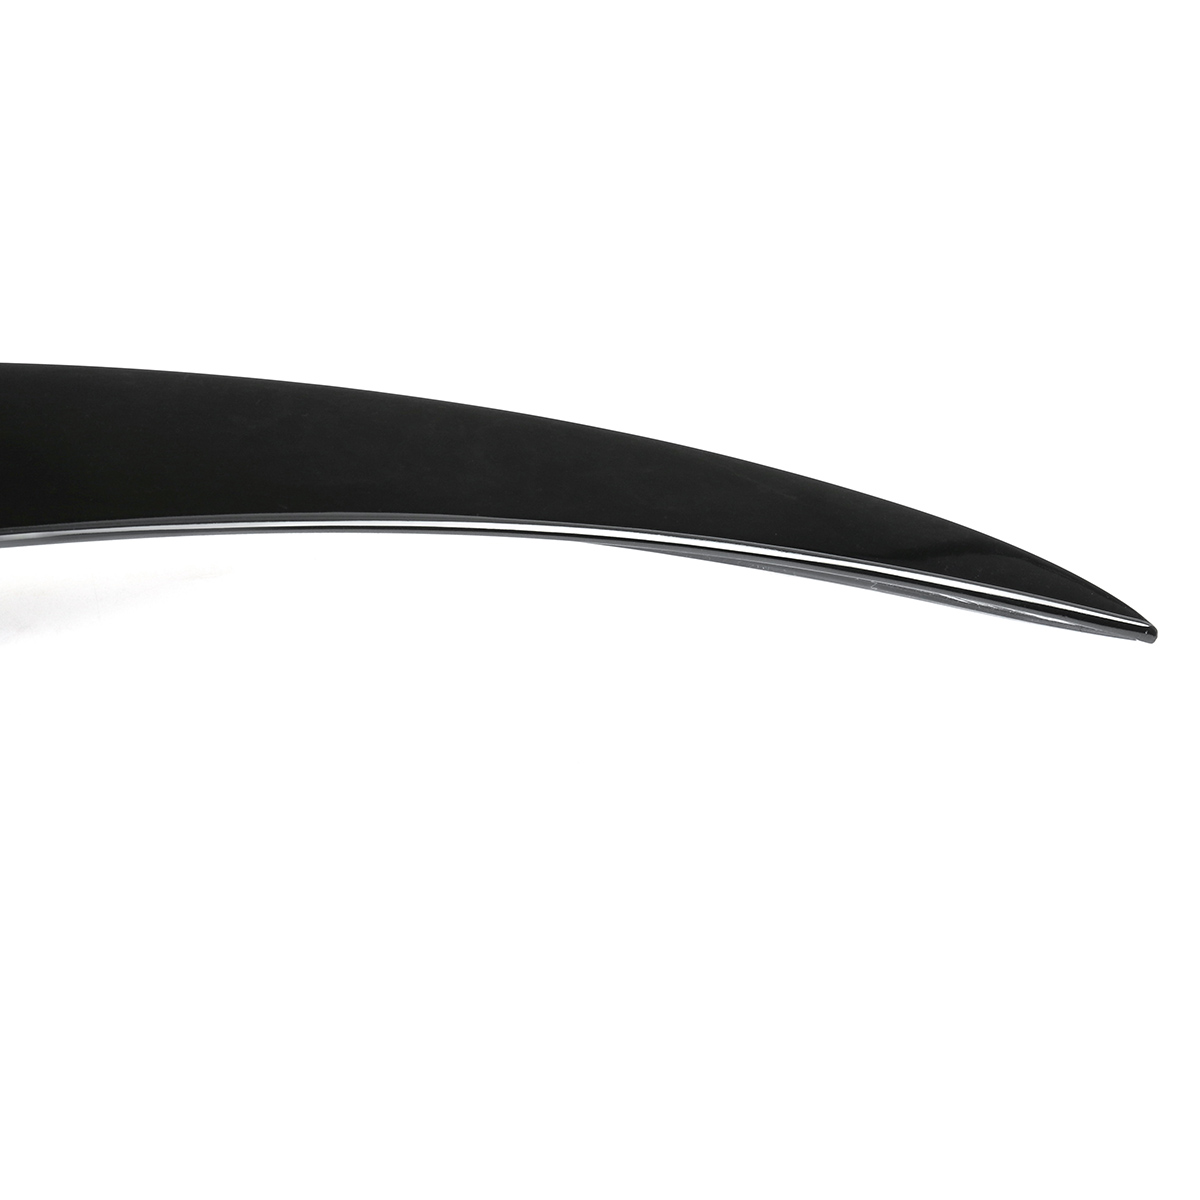 Car Rear Trunk Boot Lip Spoiler Gloss Black for Benz Mercedes Class W117 C117 Amg Style